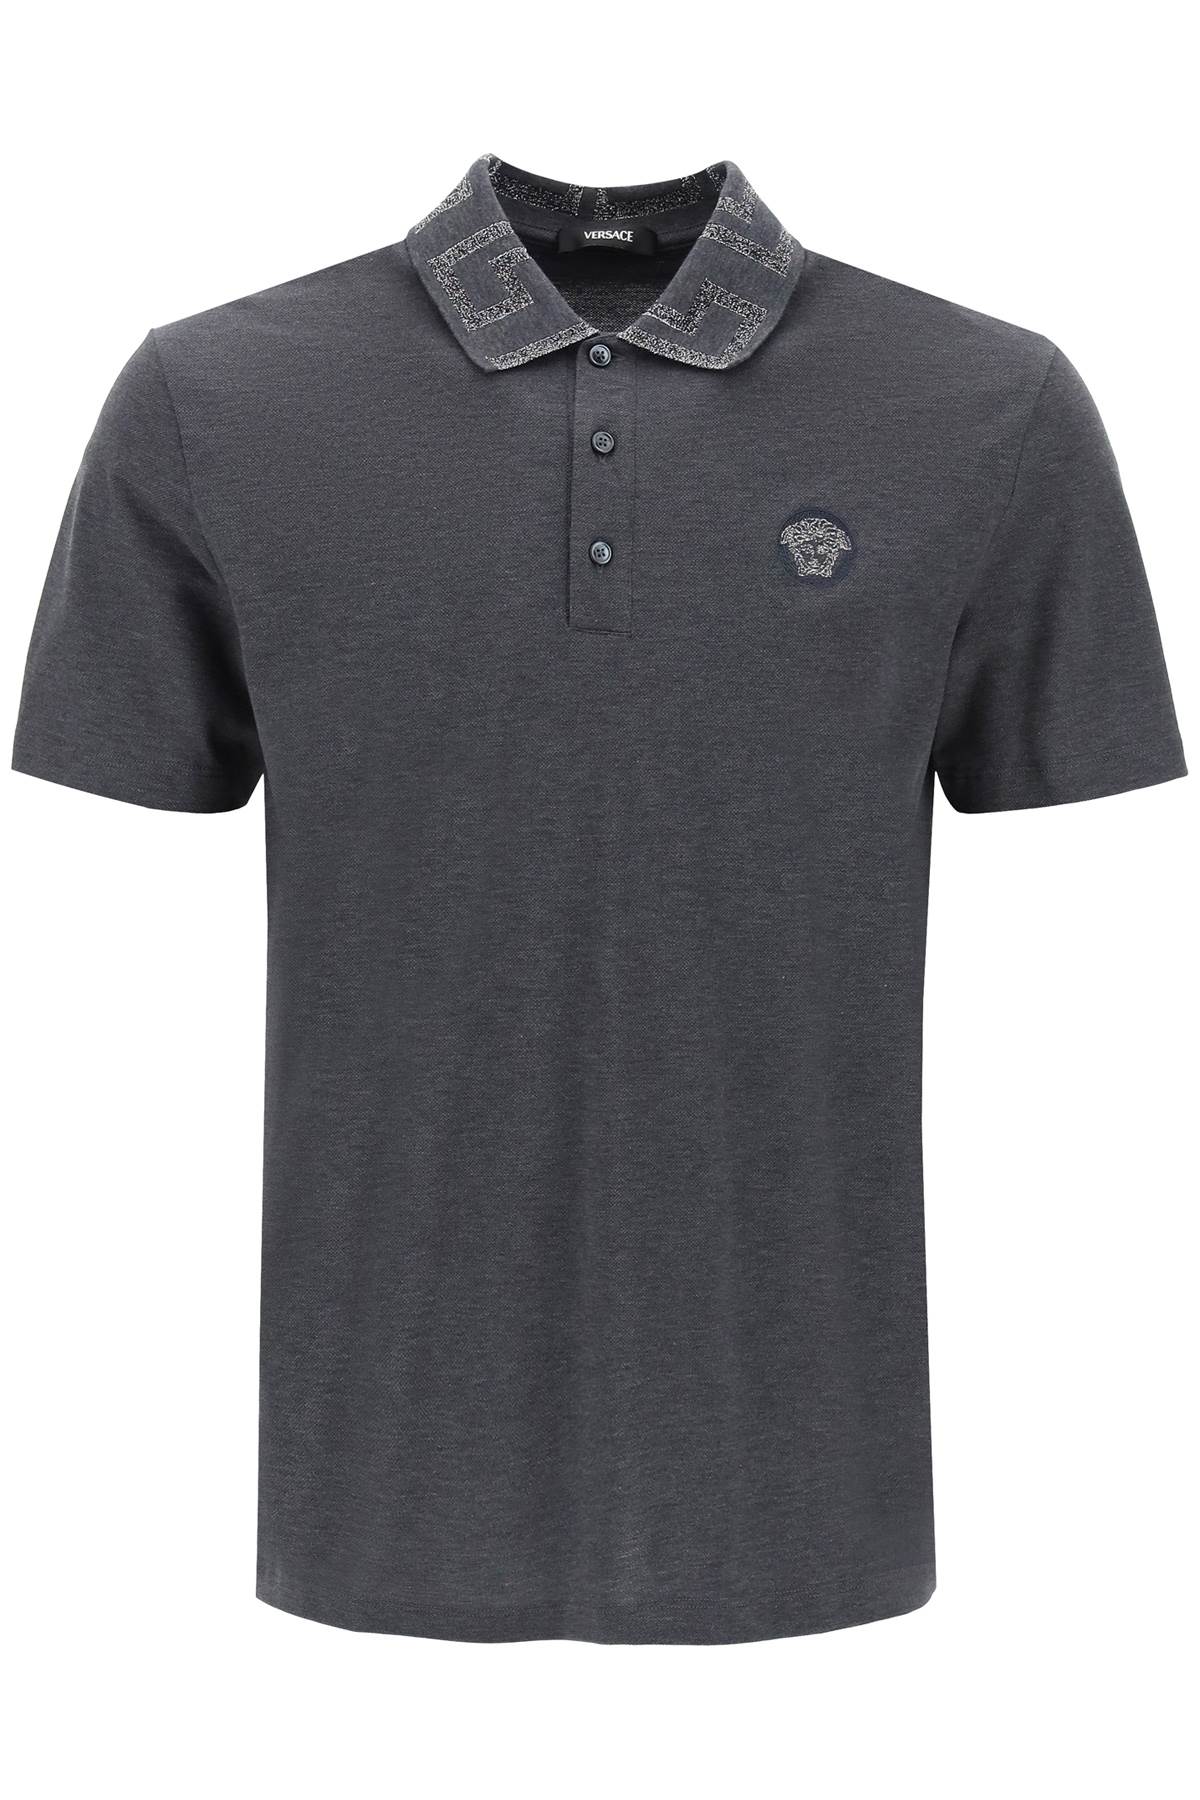 Versace Polo Shirt With Greca Collar In Anthracite (silver)